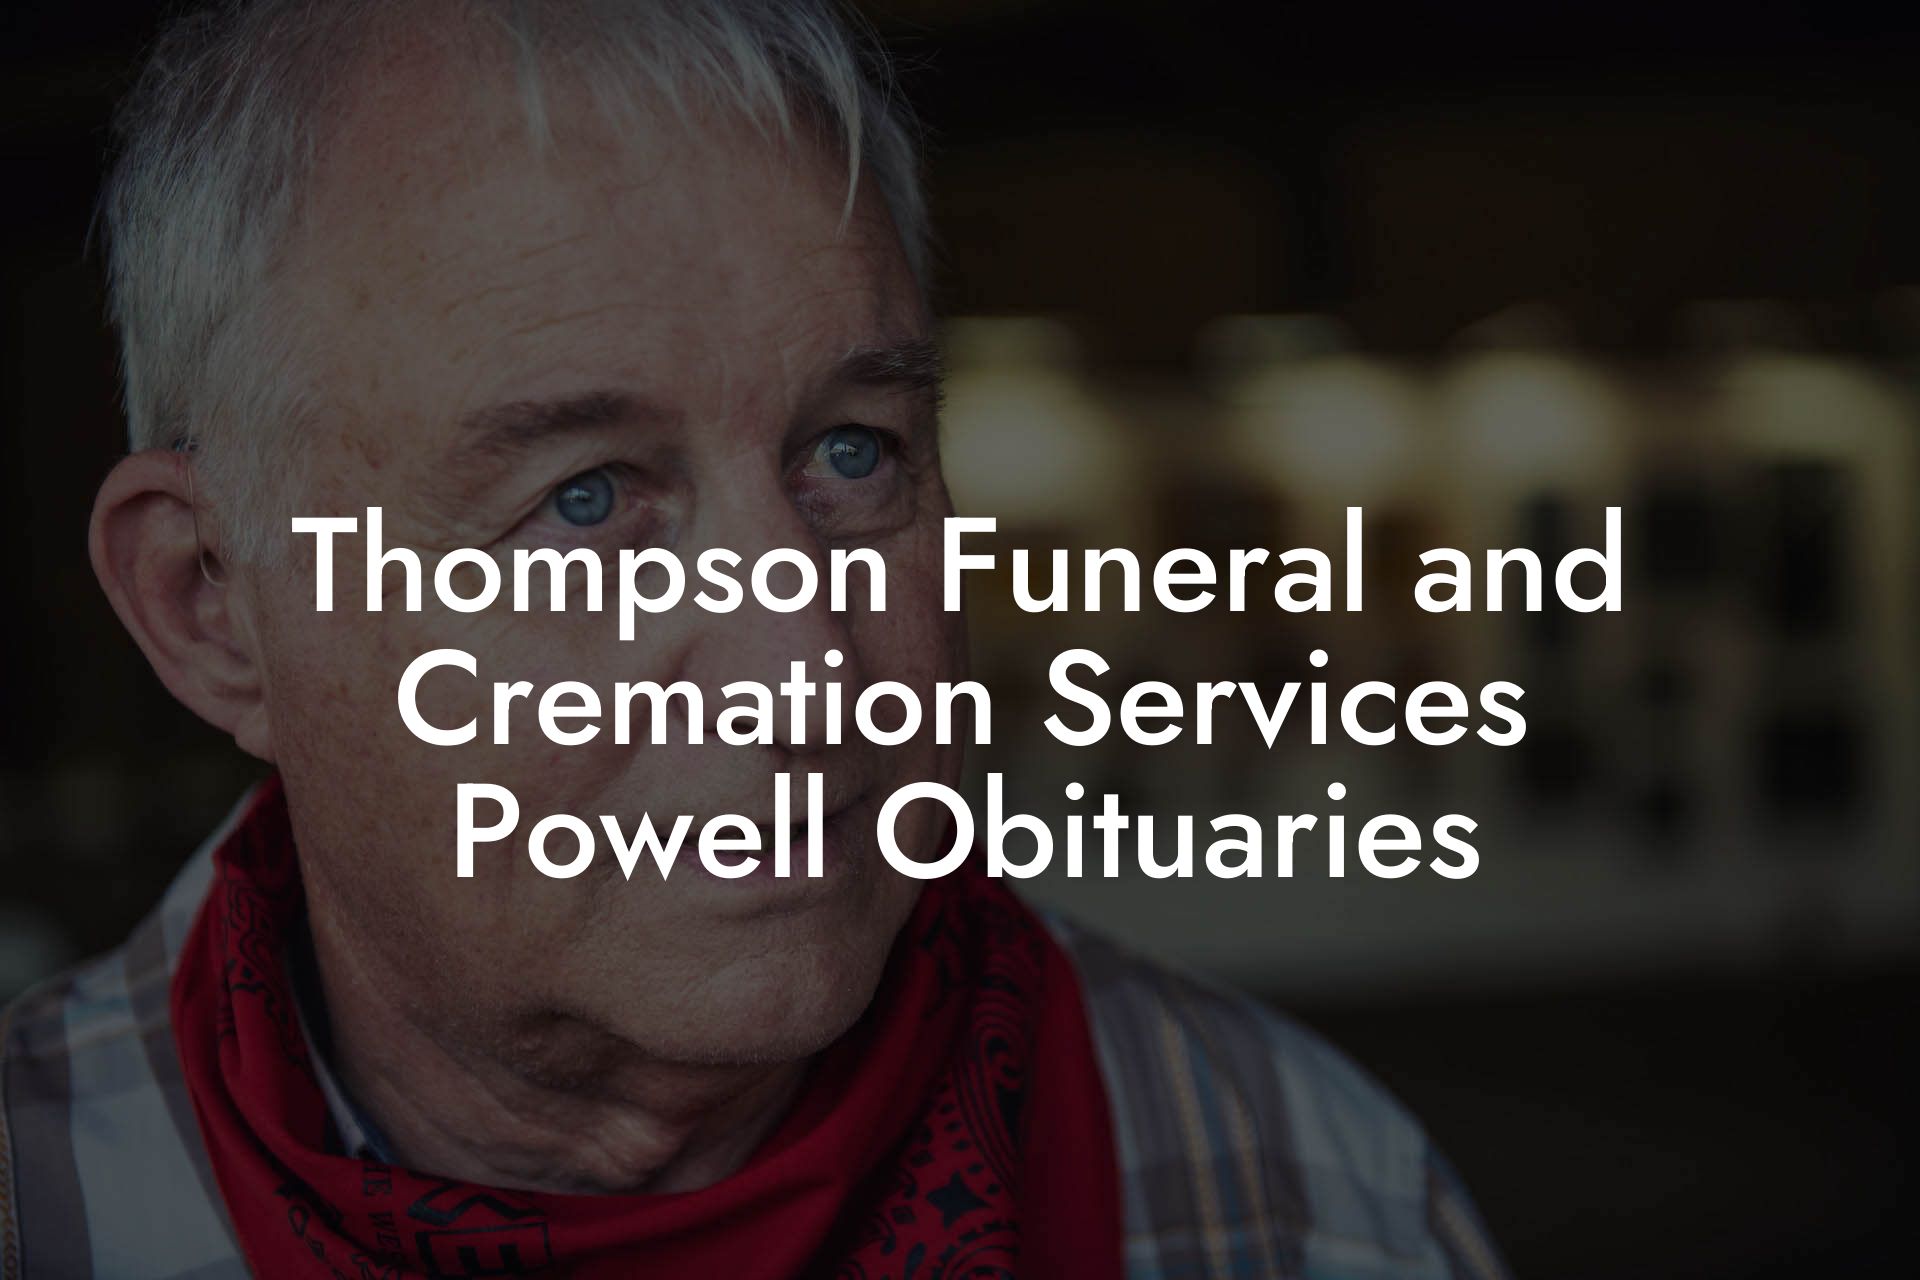 Thompson Funeral and Cremation Services Powell Obituaries